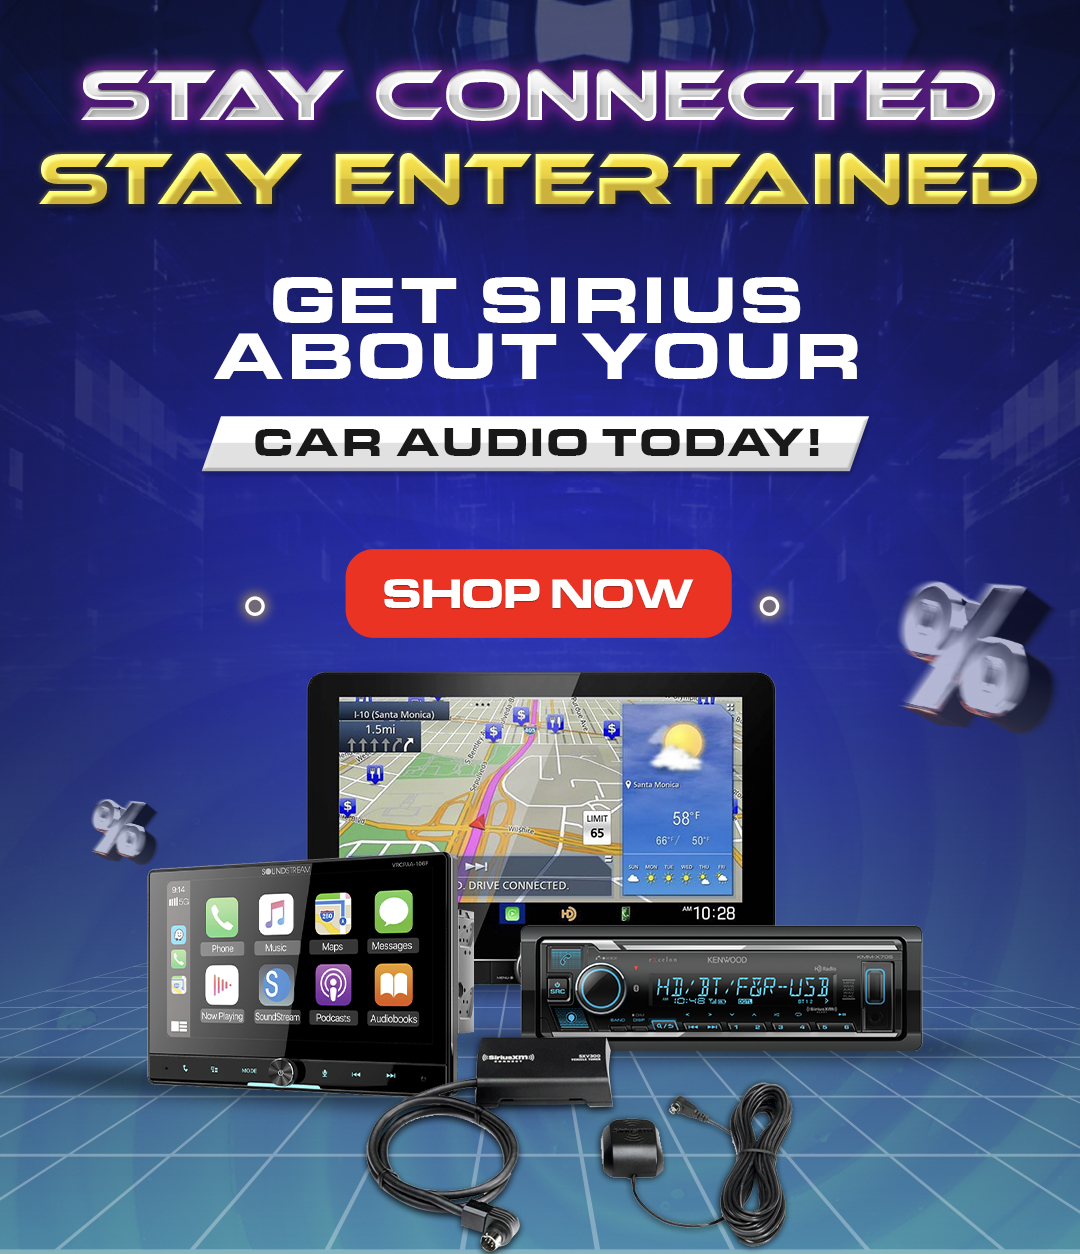 Stay Connected, Stay Entertained: Get Sirius About Your Car Audio Today!